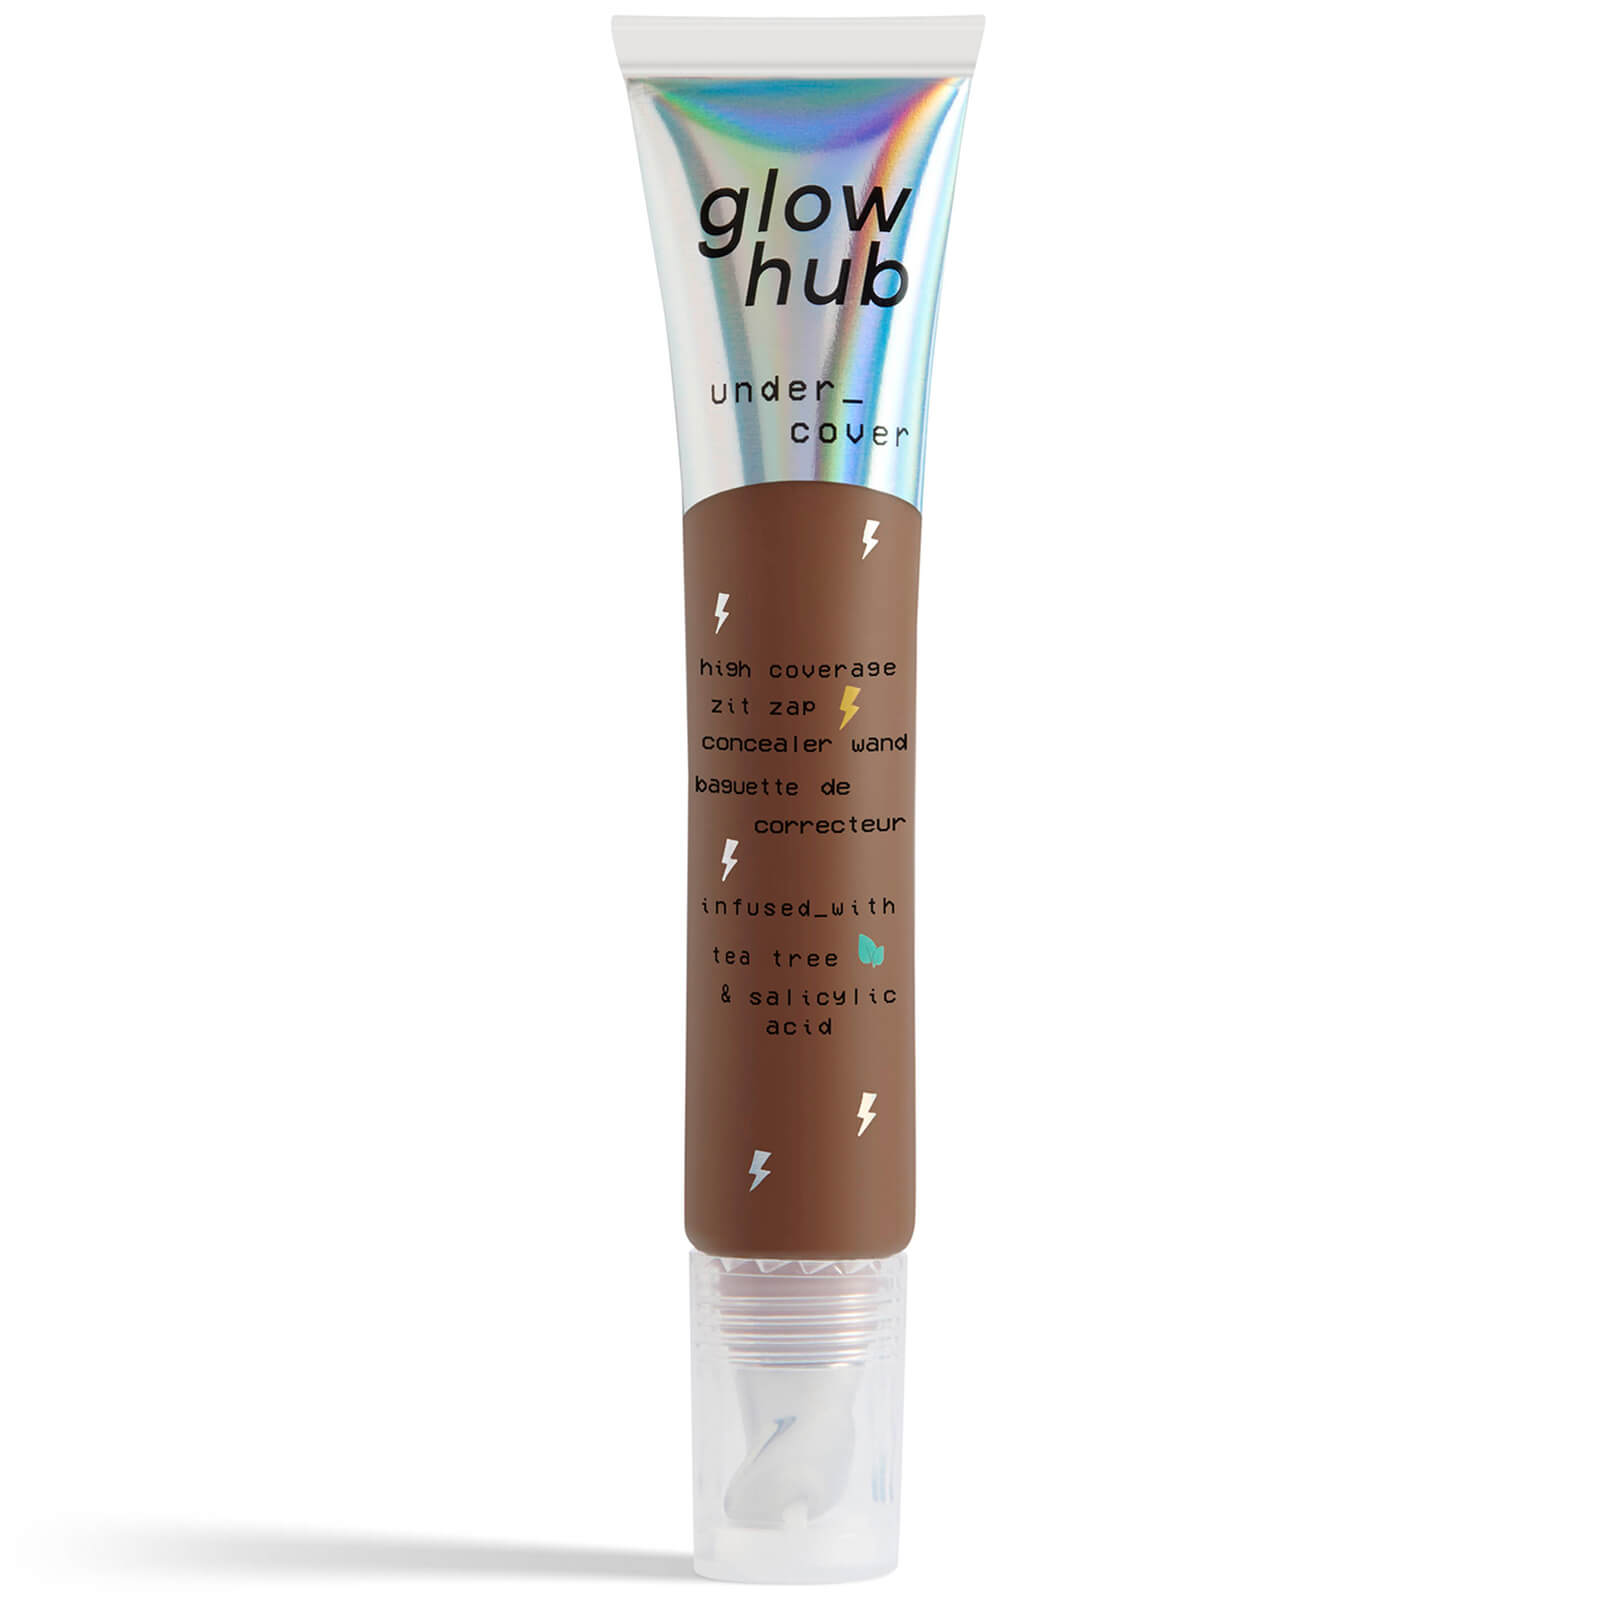 Glow Hub Under Cover High Coverage Zit Zap Concealer Wand 15ml (various Shades) - 25c In Brown